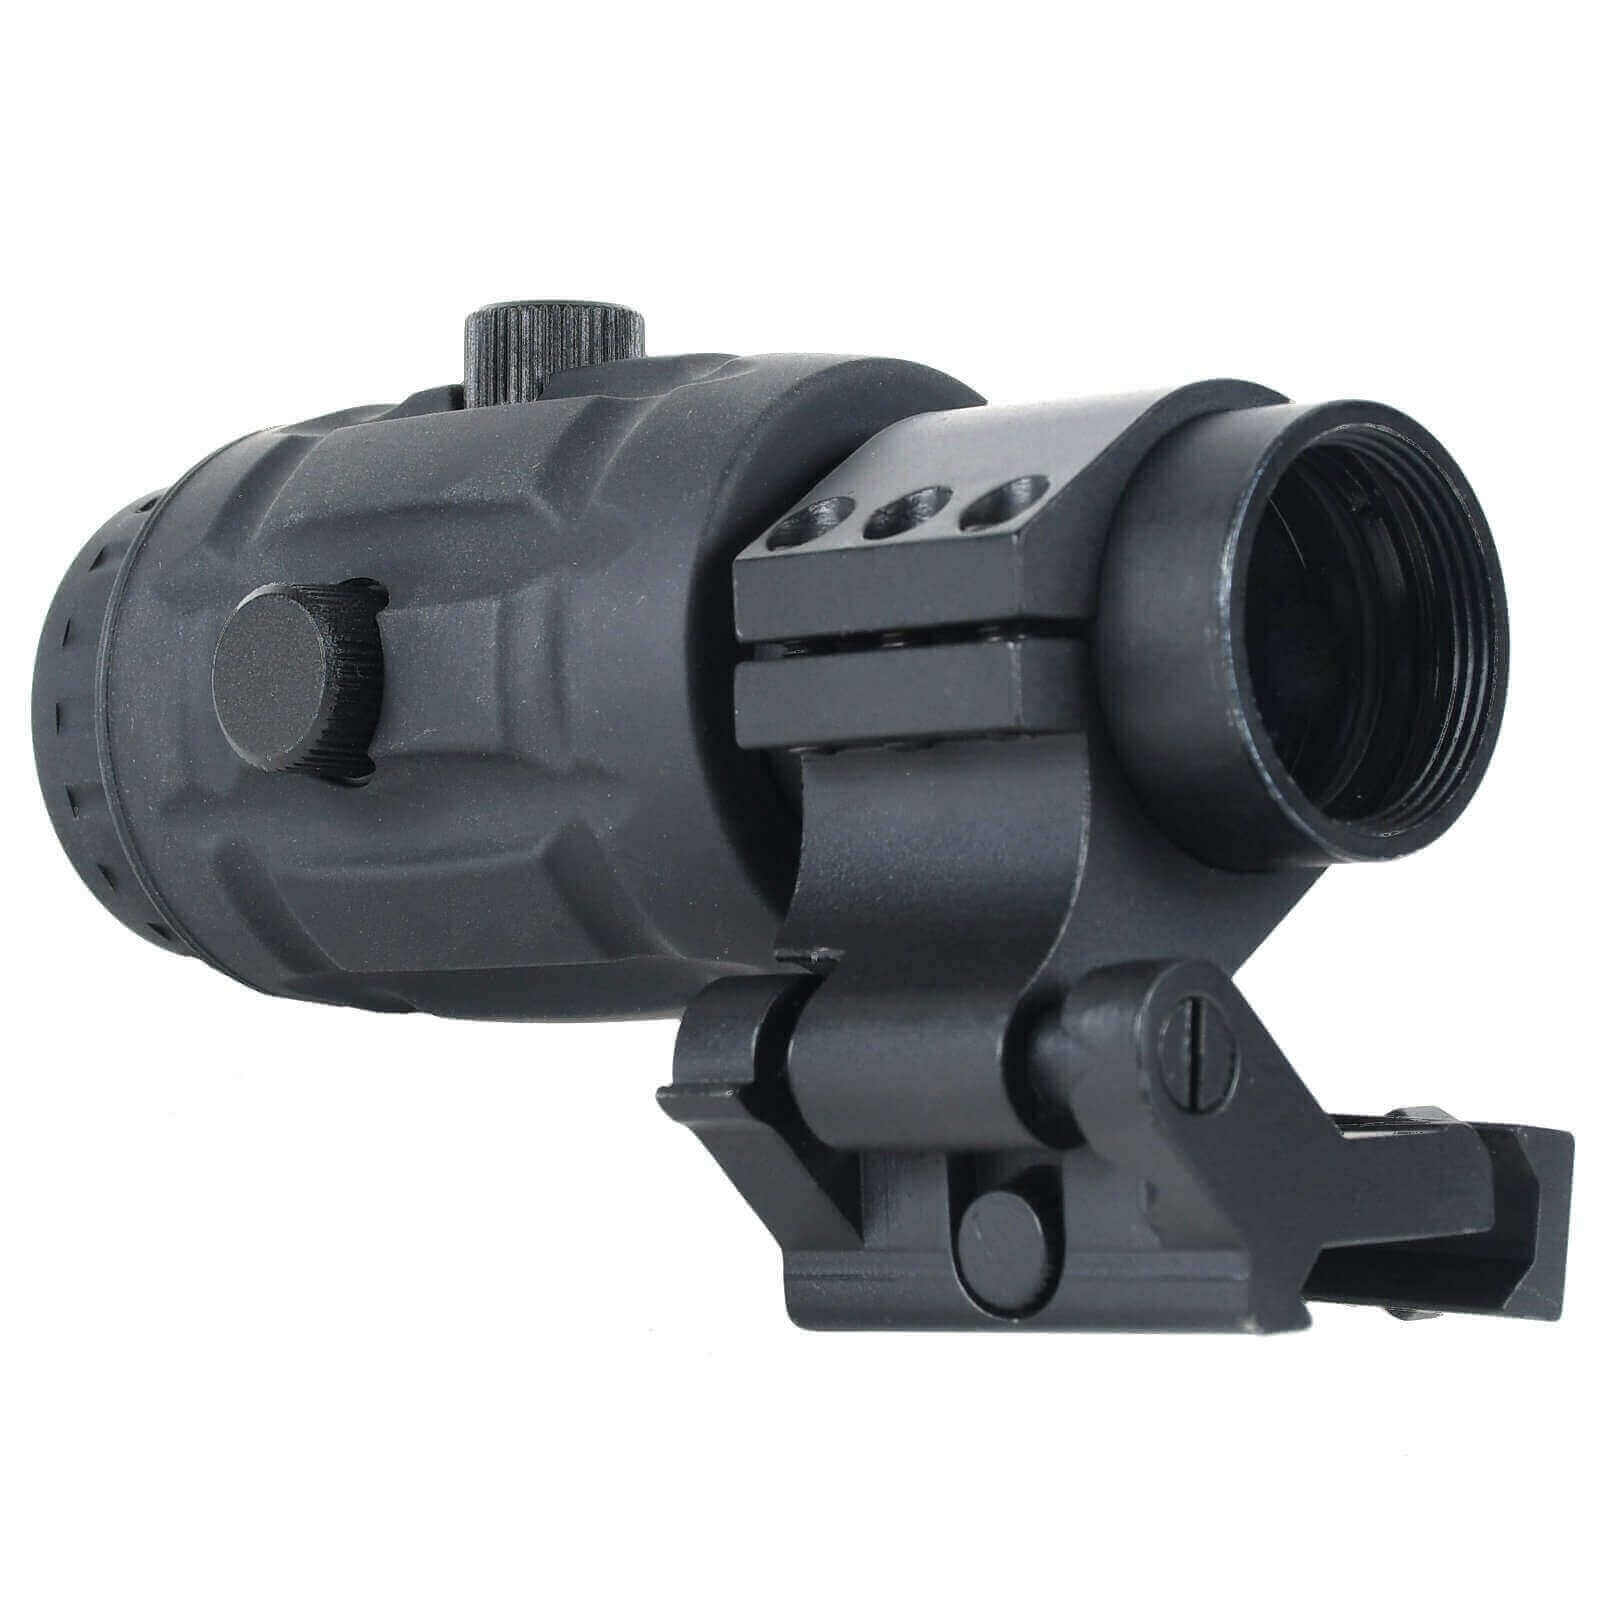 AT3™ RRDM™ 3X Red Dot Magnifier with Flip-to-Side Mount